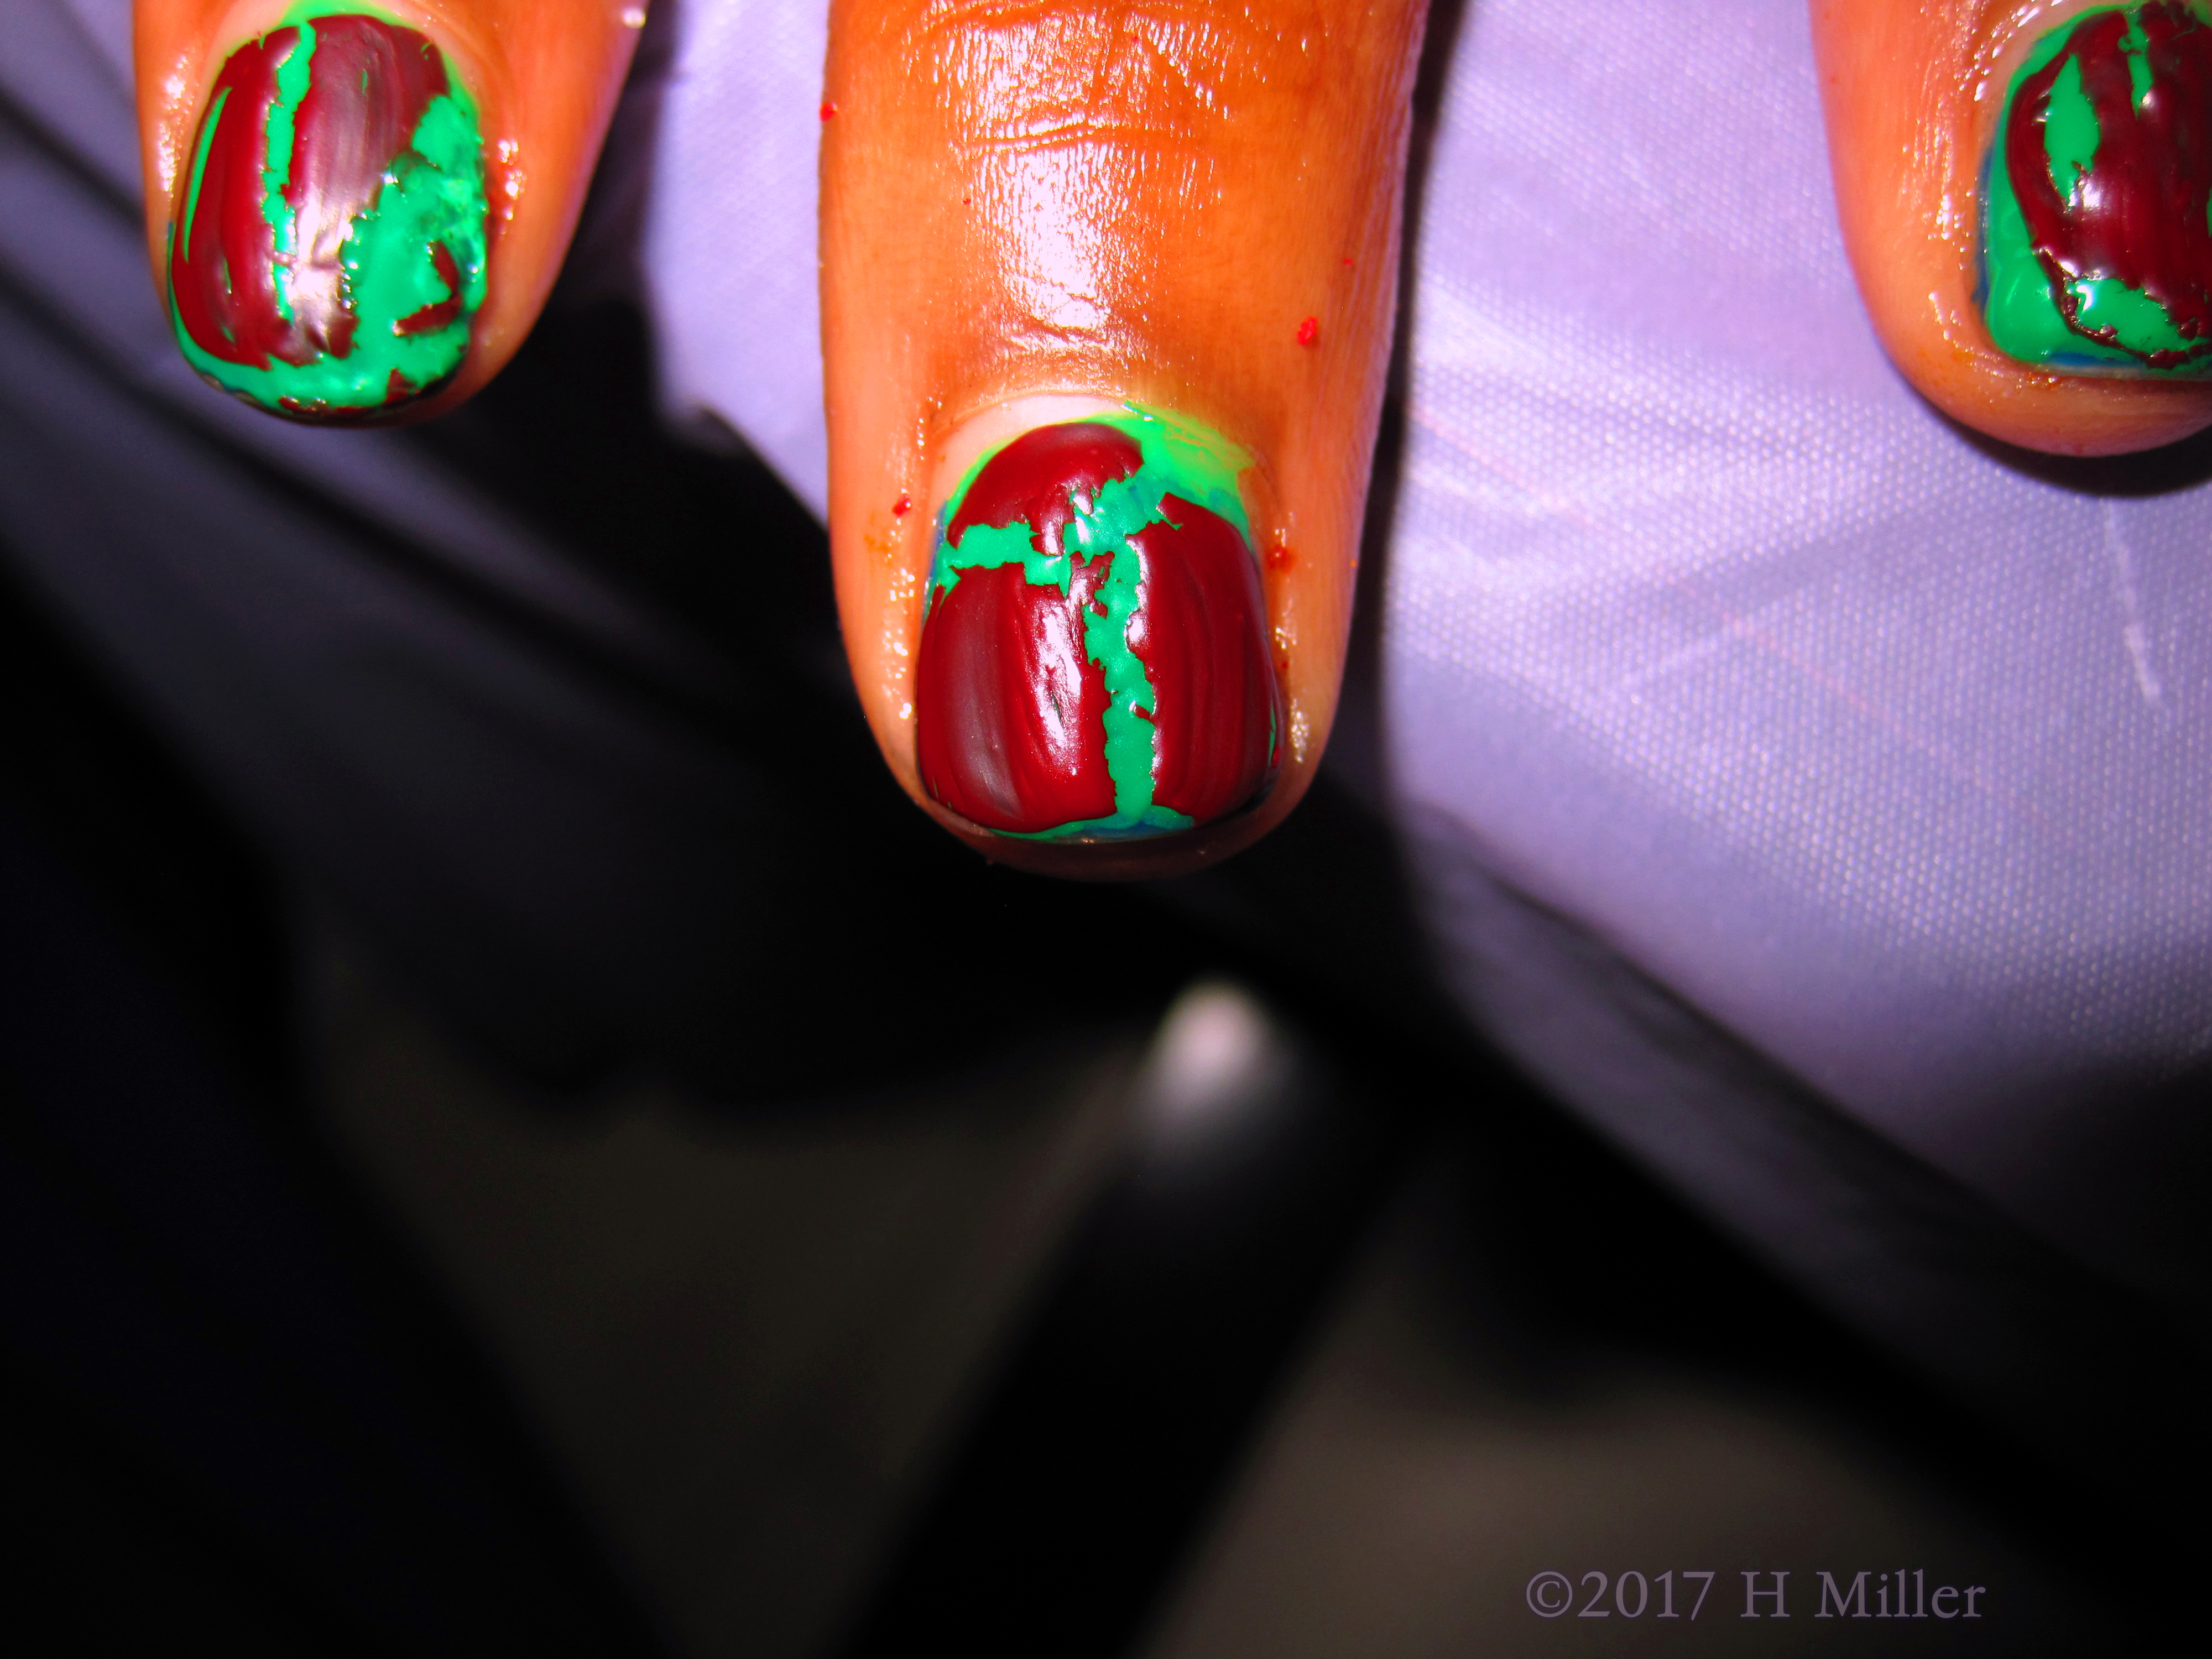 Closer View Of The Shattered Kids Nail Design. 